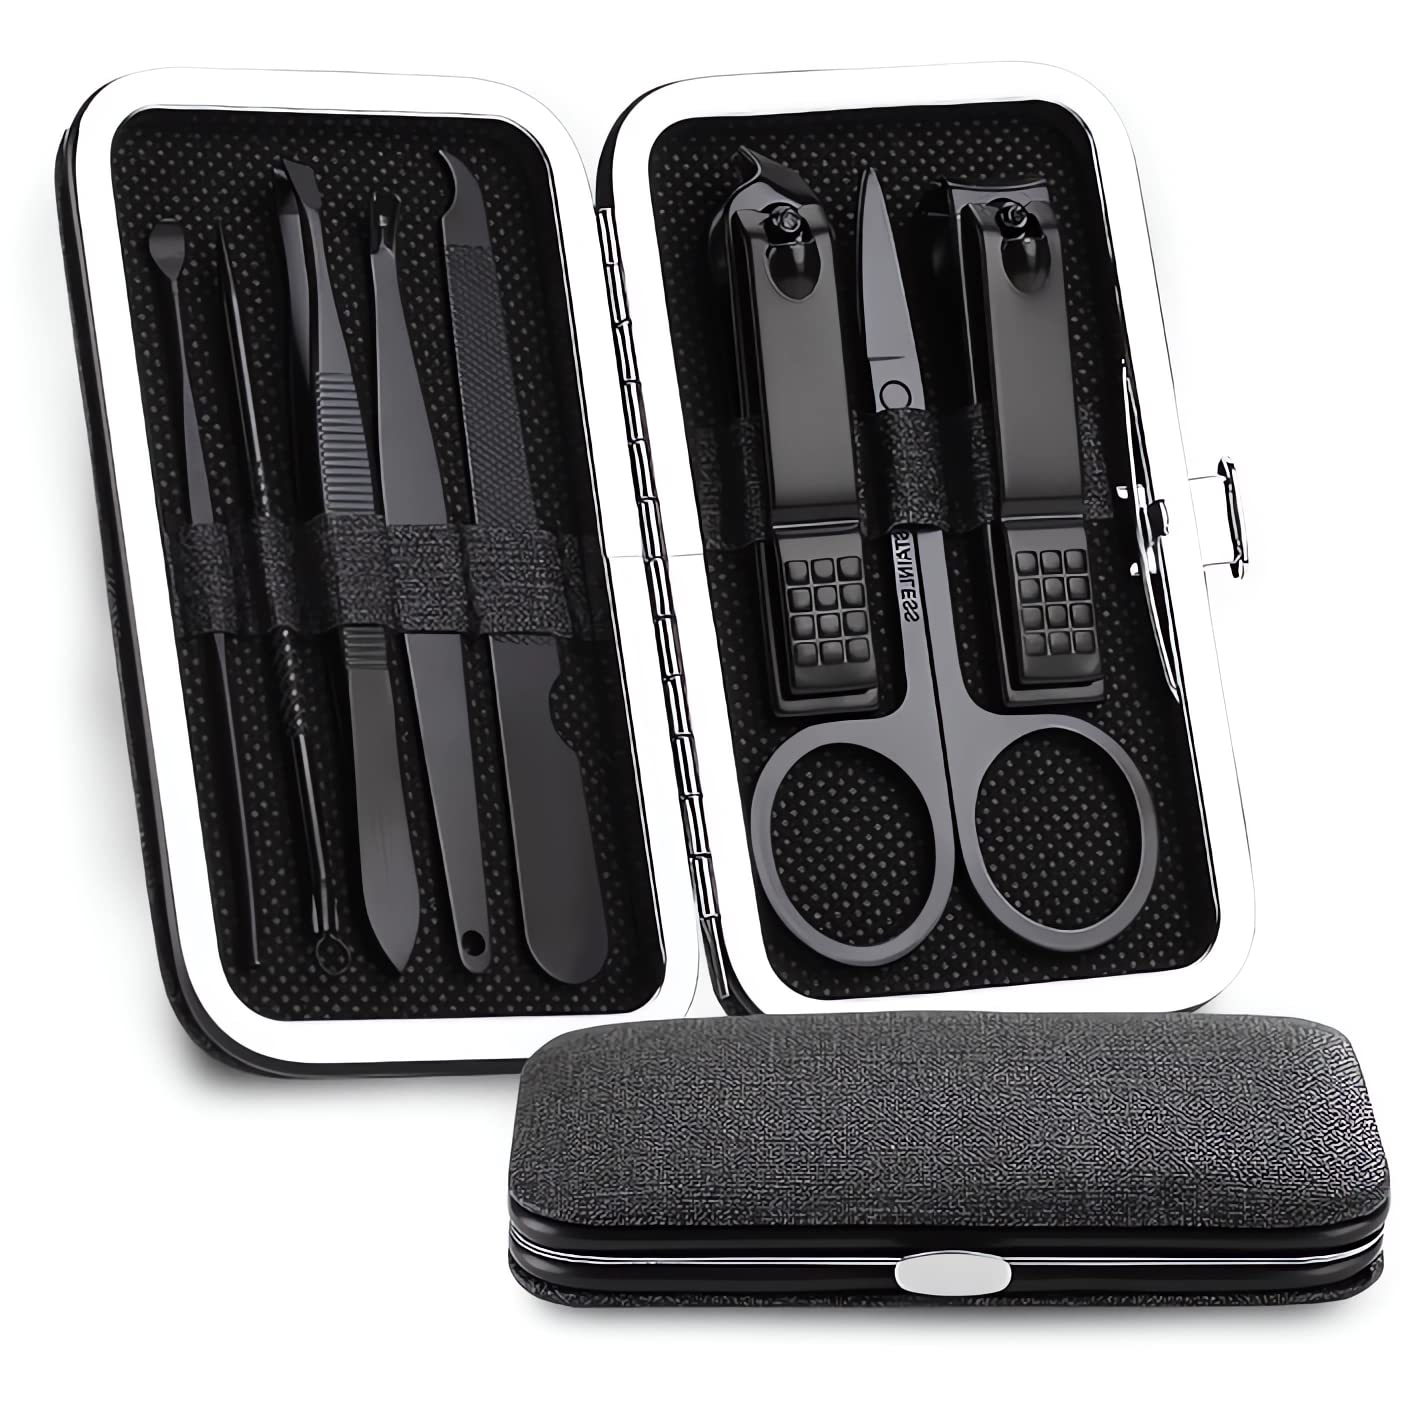 Small Travel Manicure Set for Men and Women | Nail Set Perfect for Feet and Fingernails | Professional Nail Care Set in Fabric Case Perfect for Men and Women | 2023 (Black)